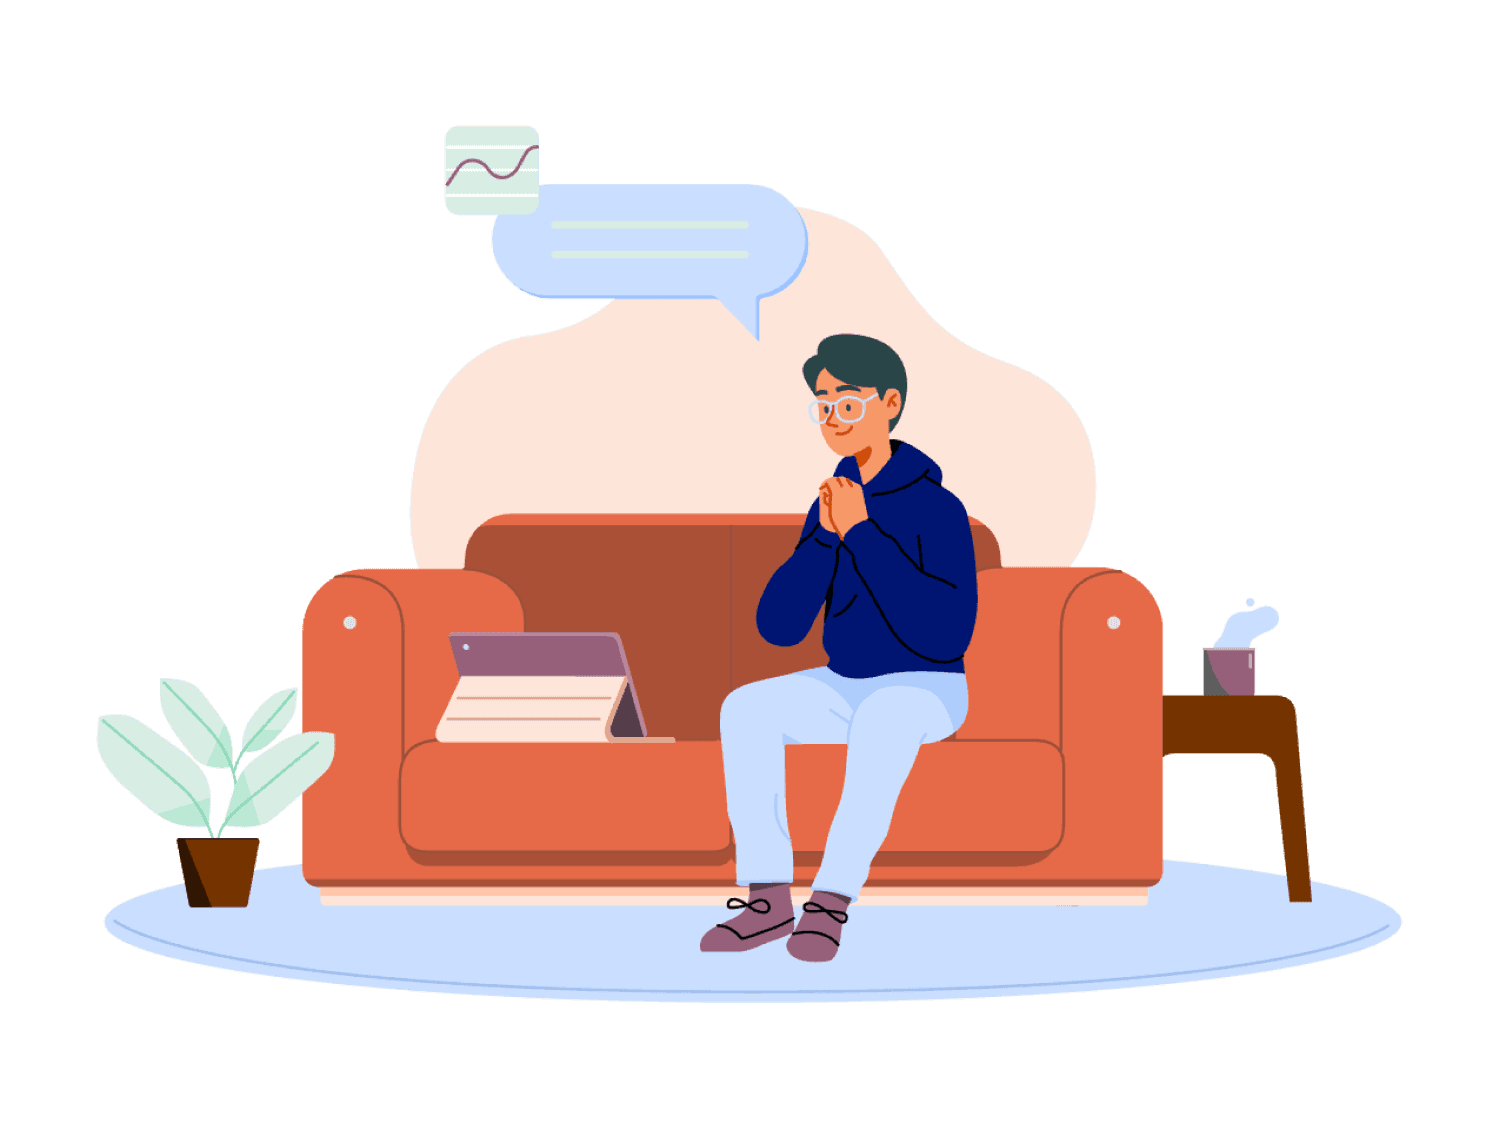 Illustration of person on a couch